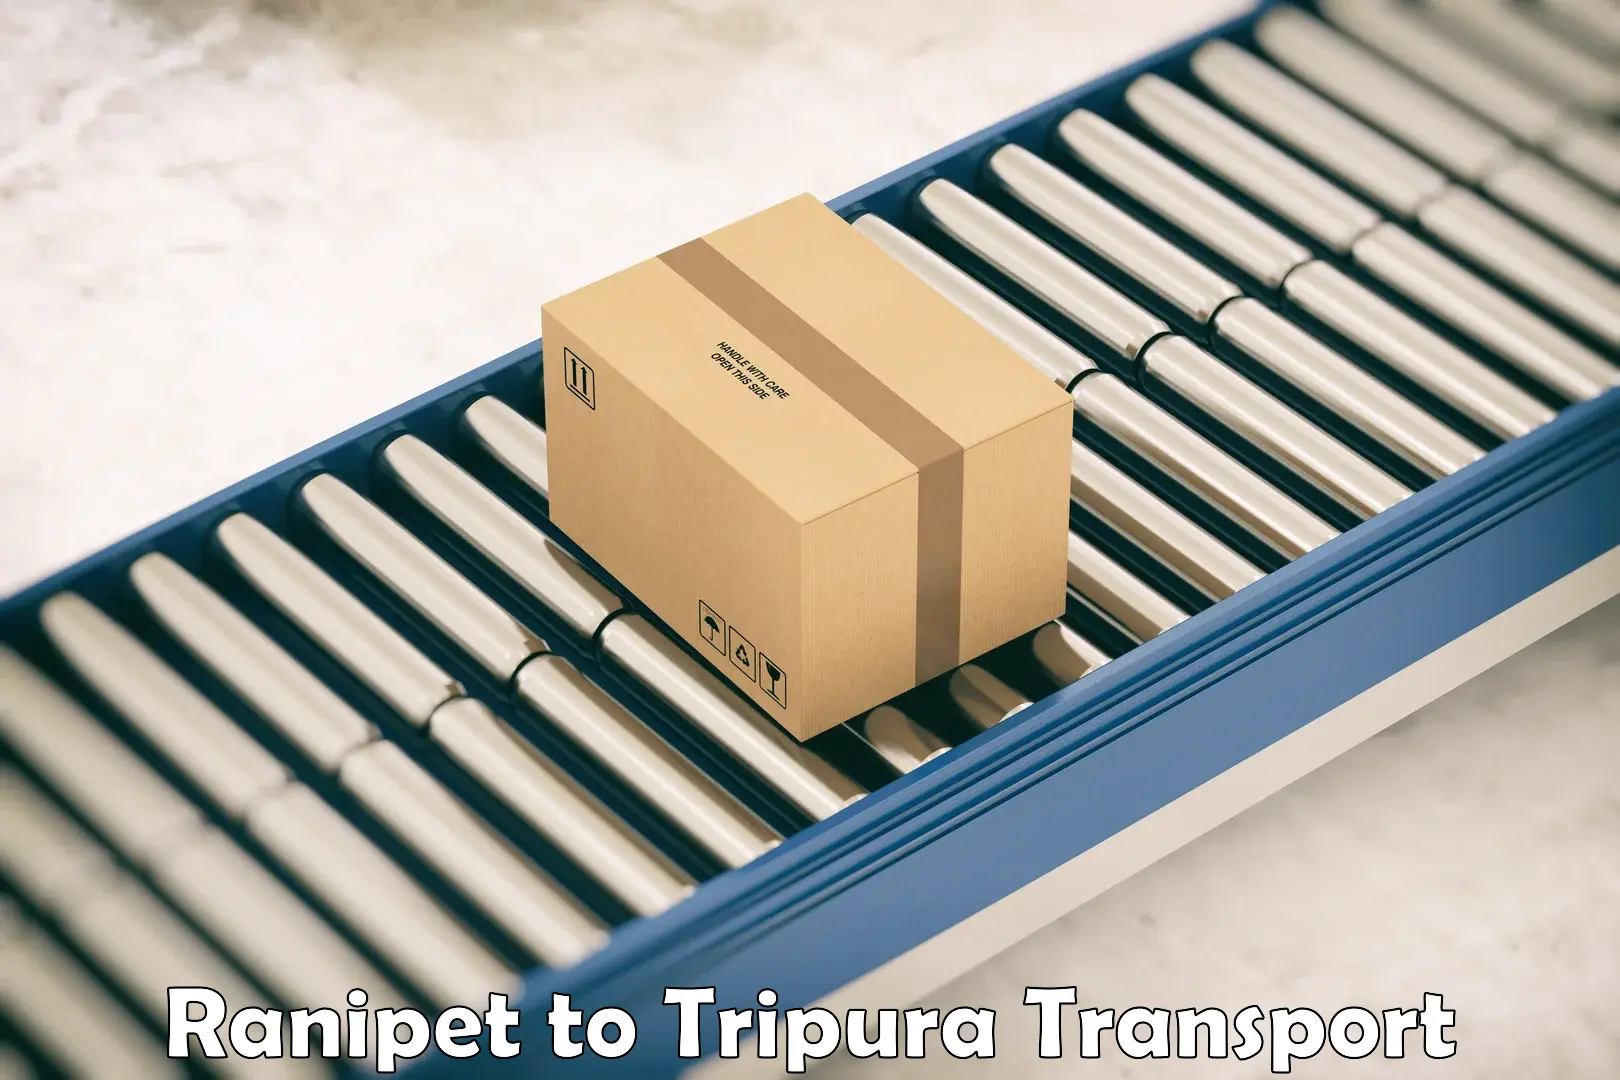 Air freight transport services Ranipet to Udaipur Tripura